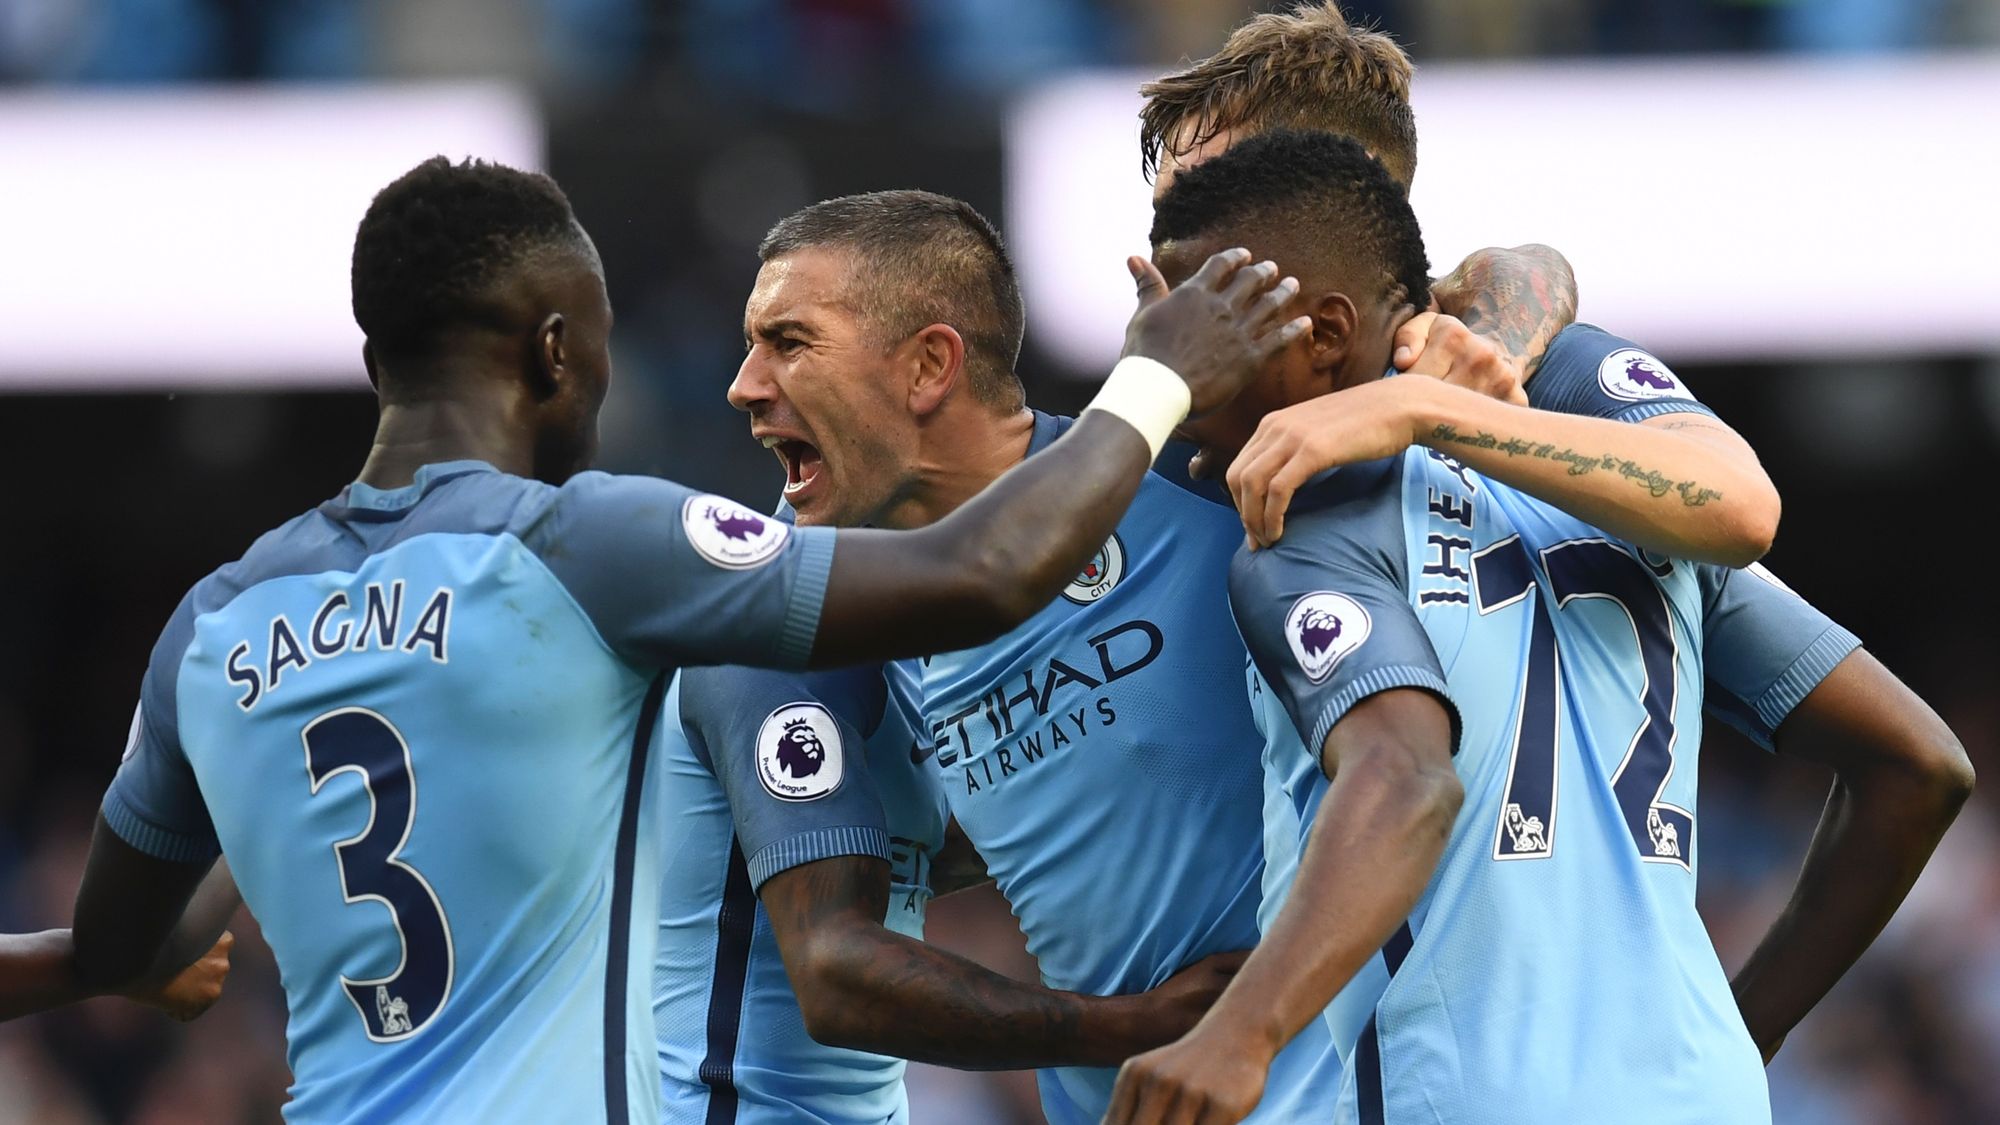 Manchester City FC - Official Website of Man City F.C.